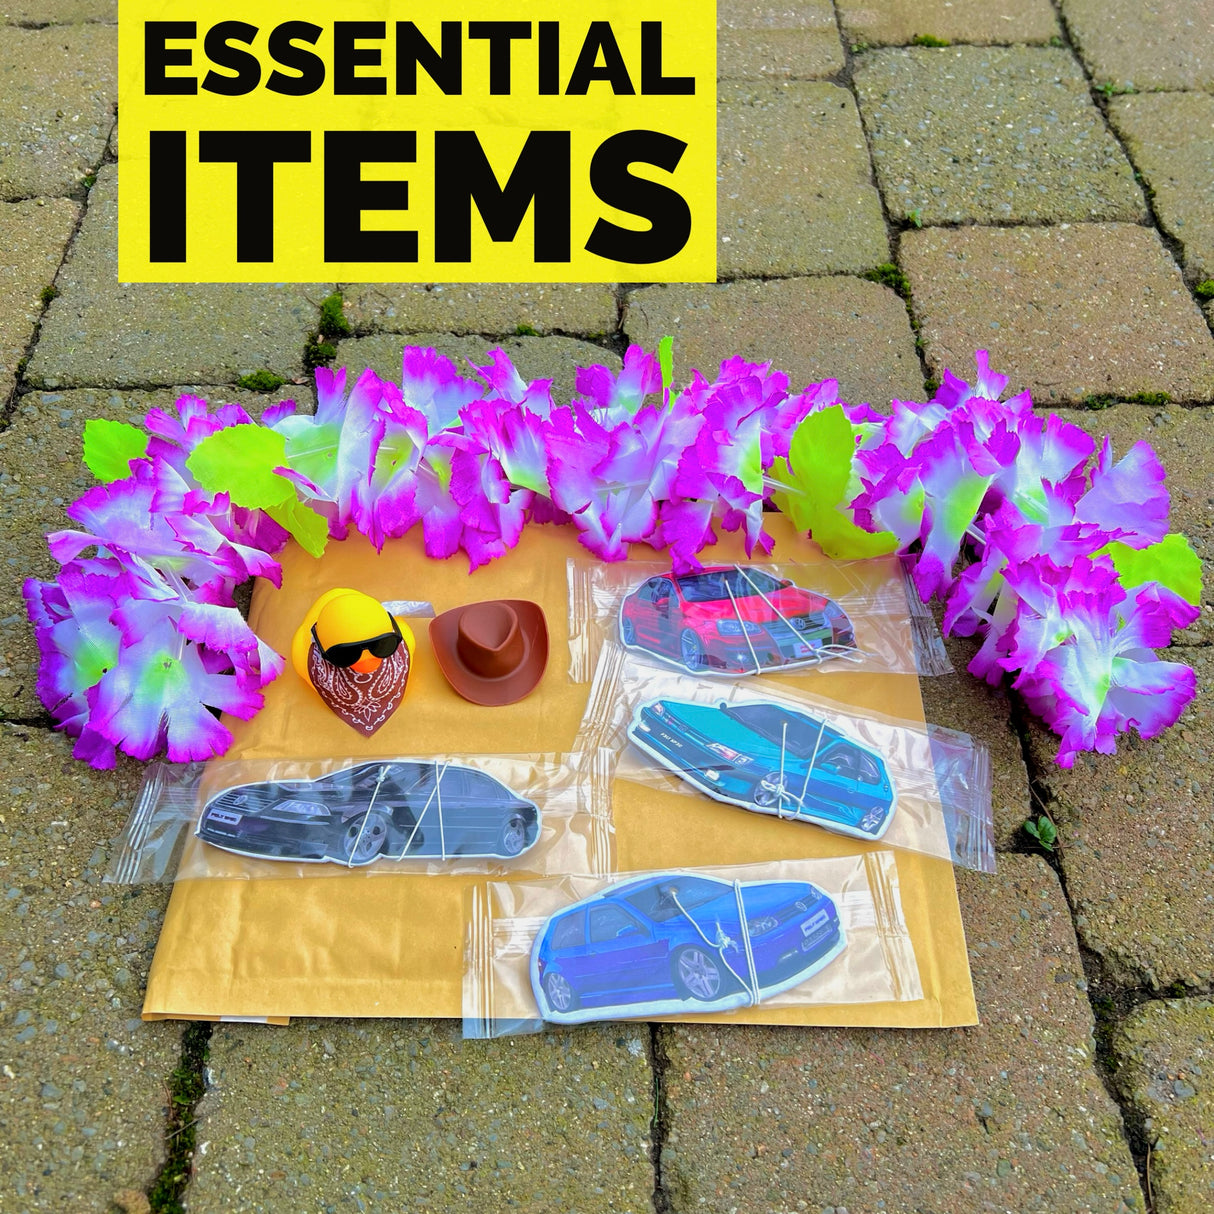 “The Essentials” Mystery Bundle